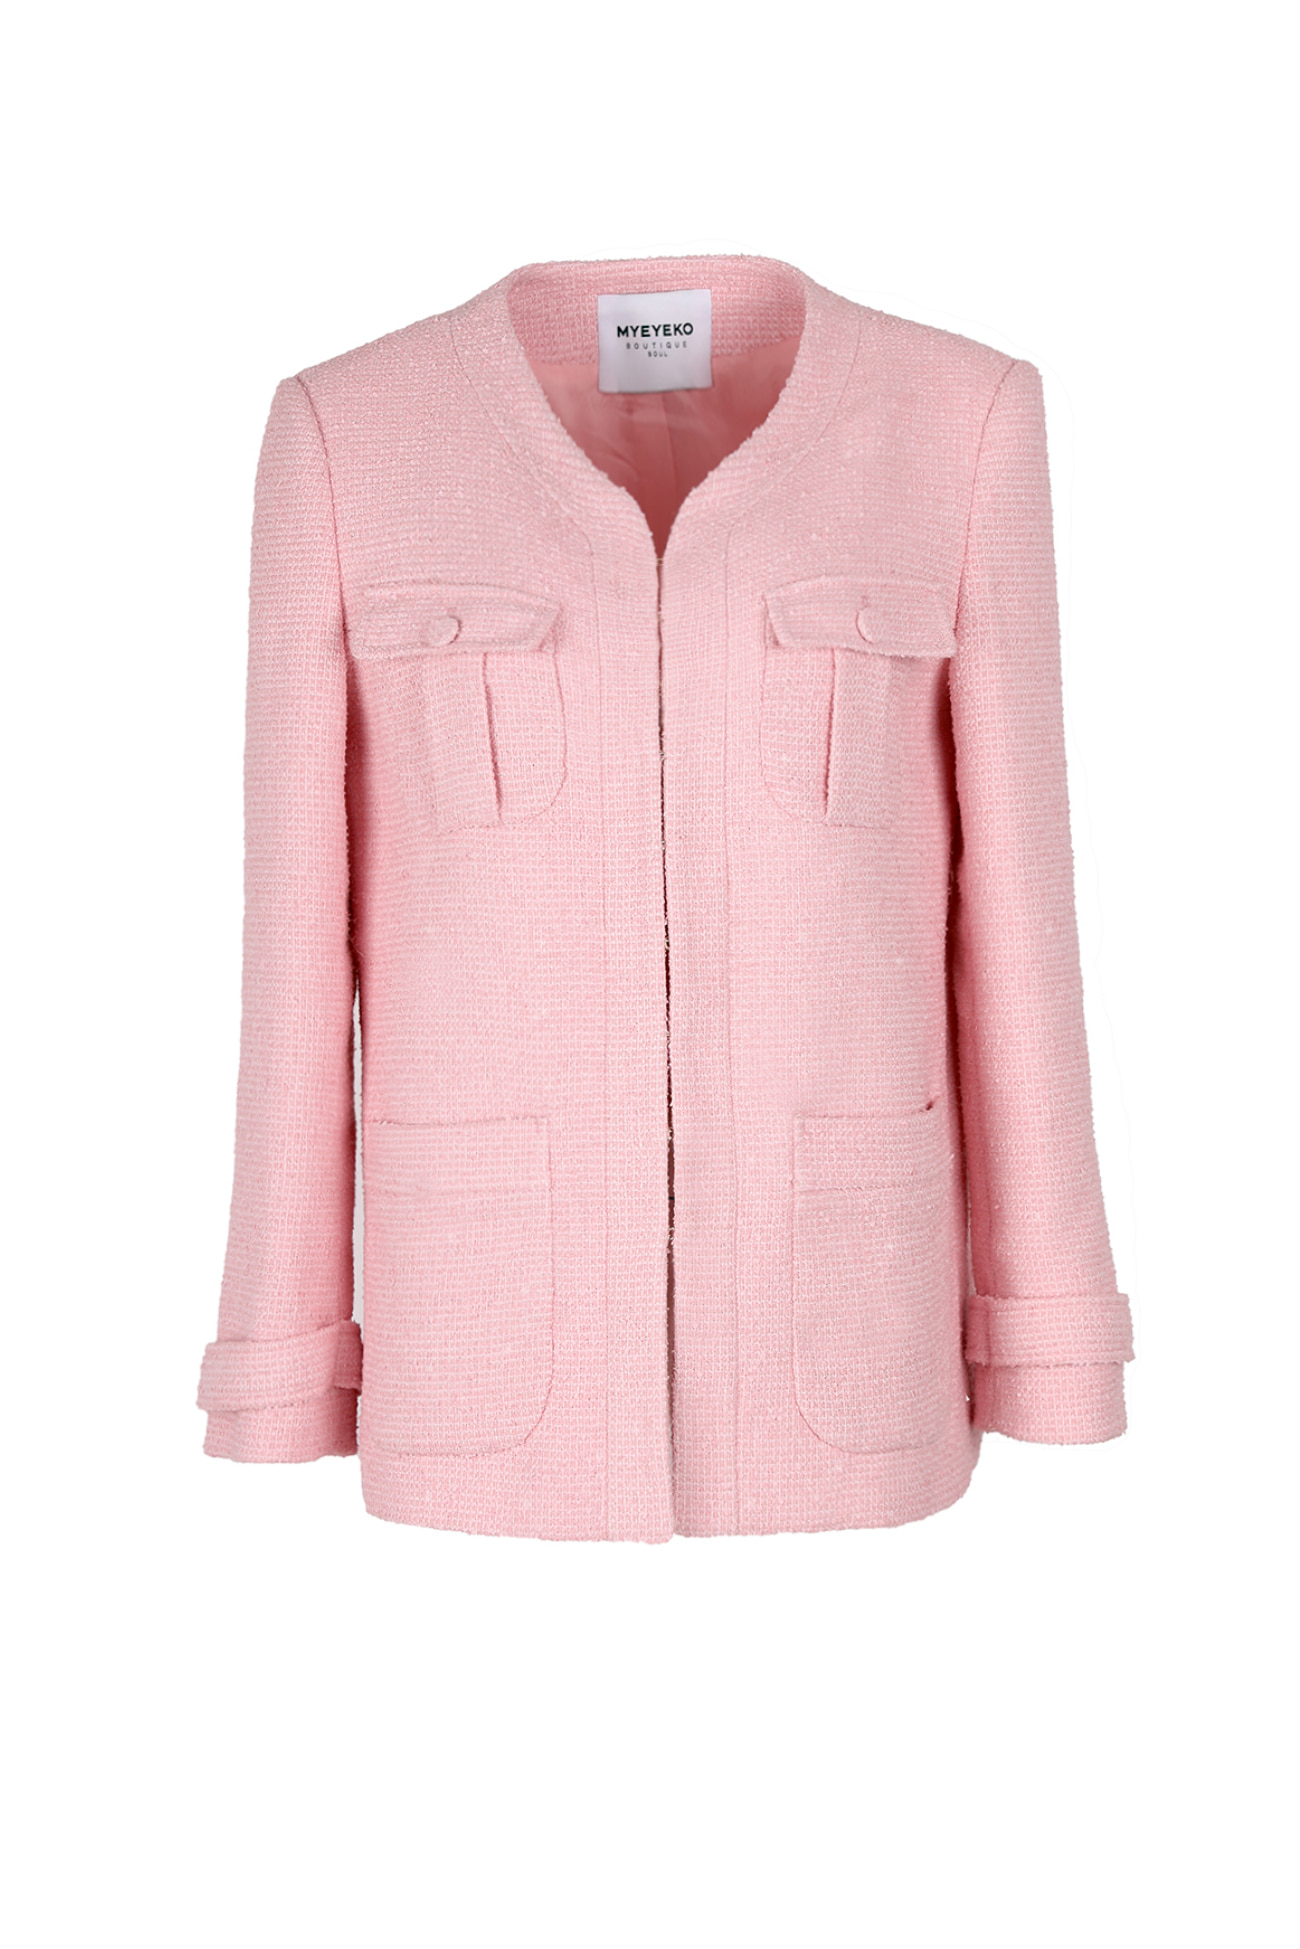 HIGH QUALITY LINE - PINK Tweed  Boucle Jacket (made fabric)